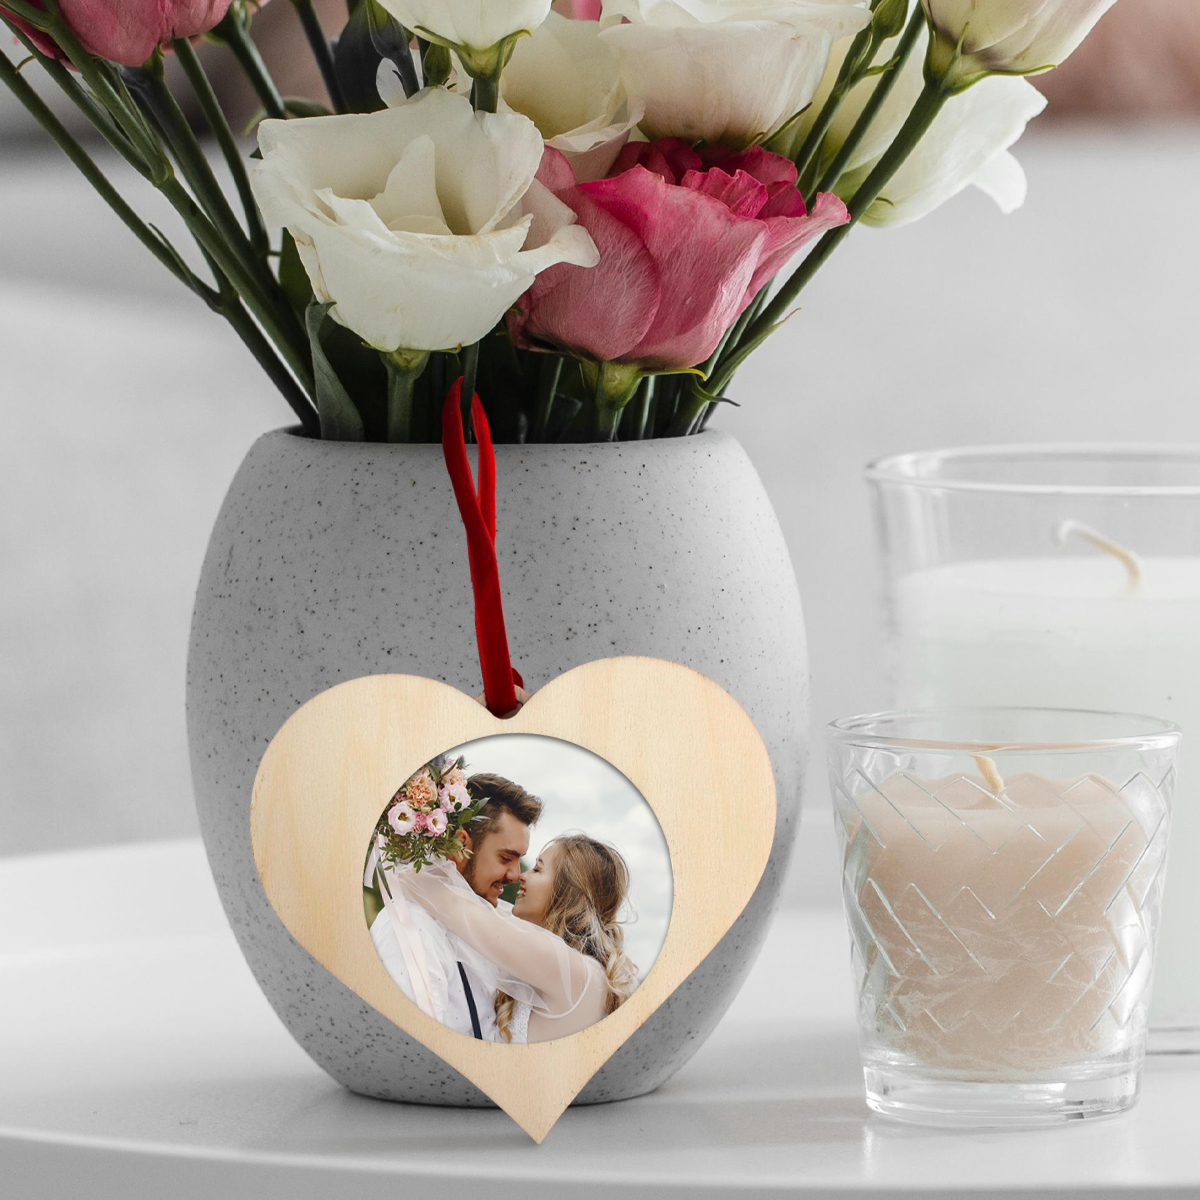 New for this Valentine's Day! ❤️
The beautiful personalisable photo insert Wooden Heart Ornament. 

#Adventa #Innovation #personalisation #gift #ValentinesDay #photogift